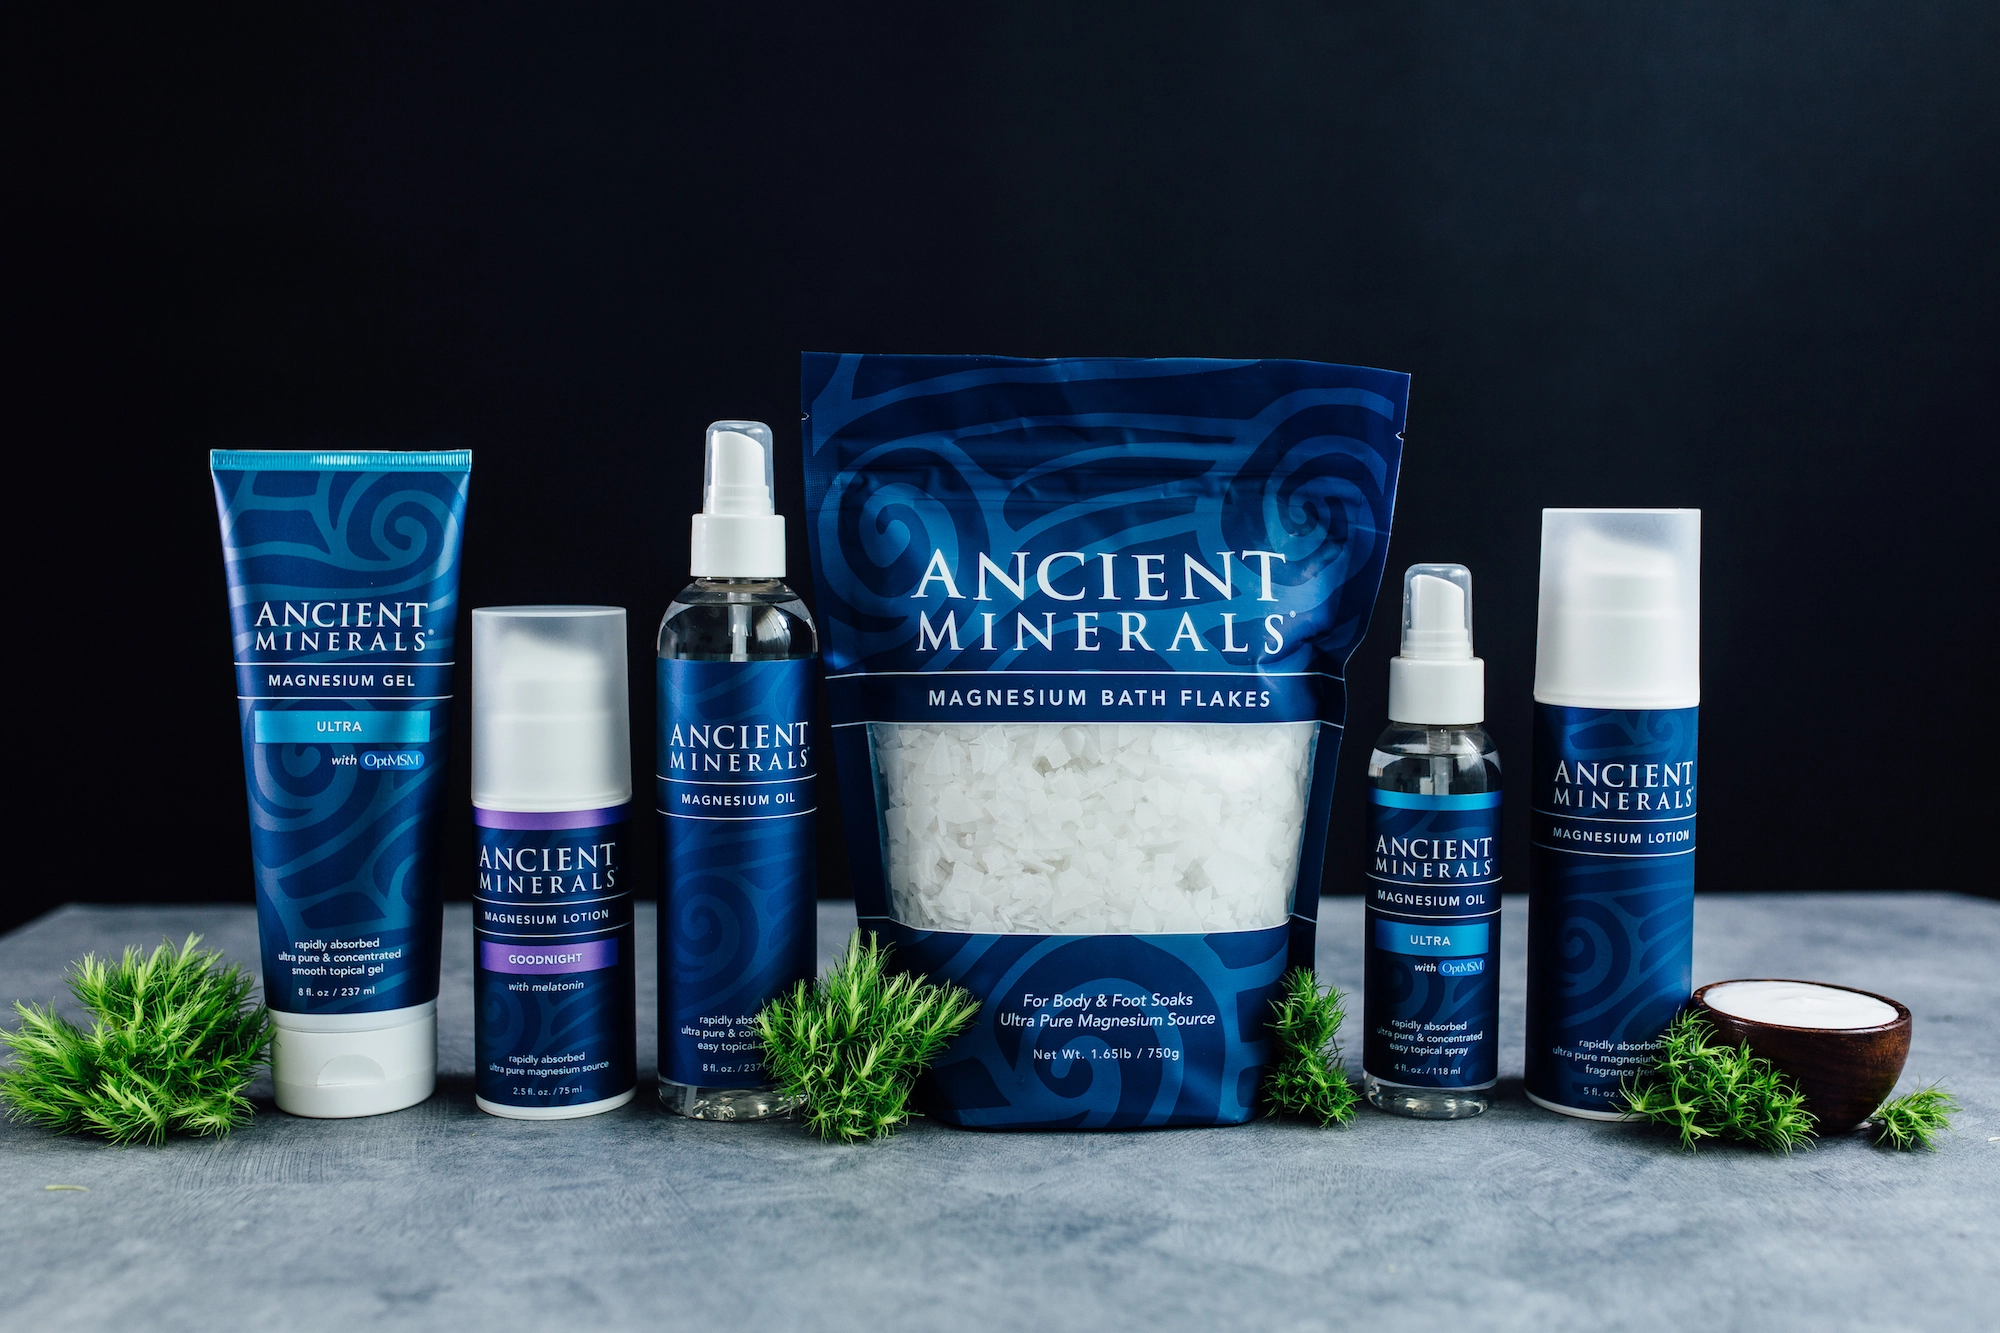 Ancient Minerals products